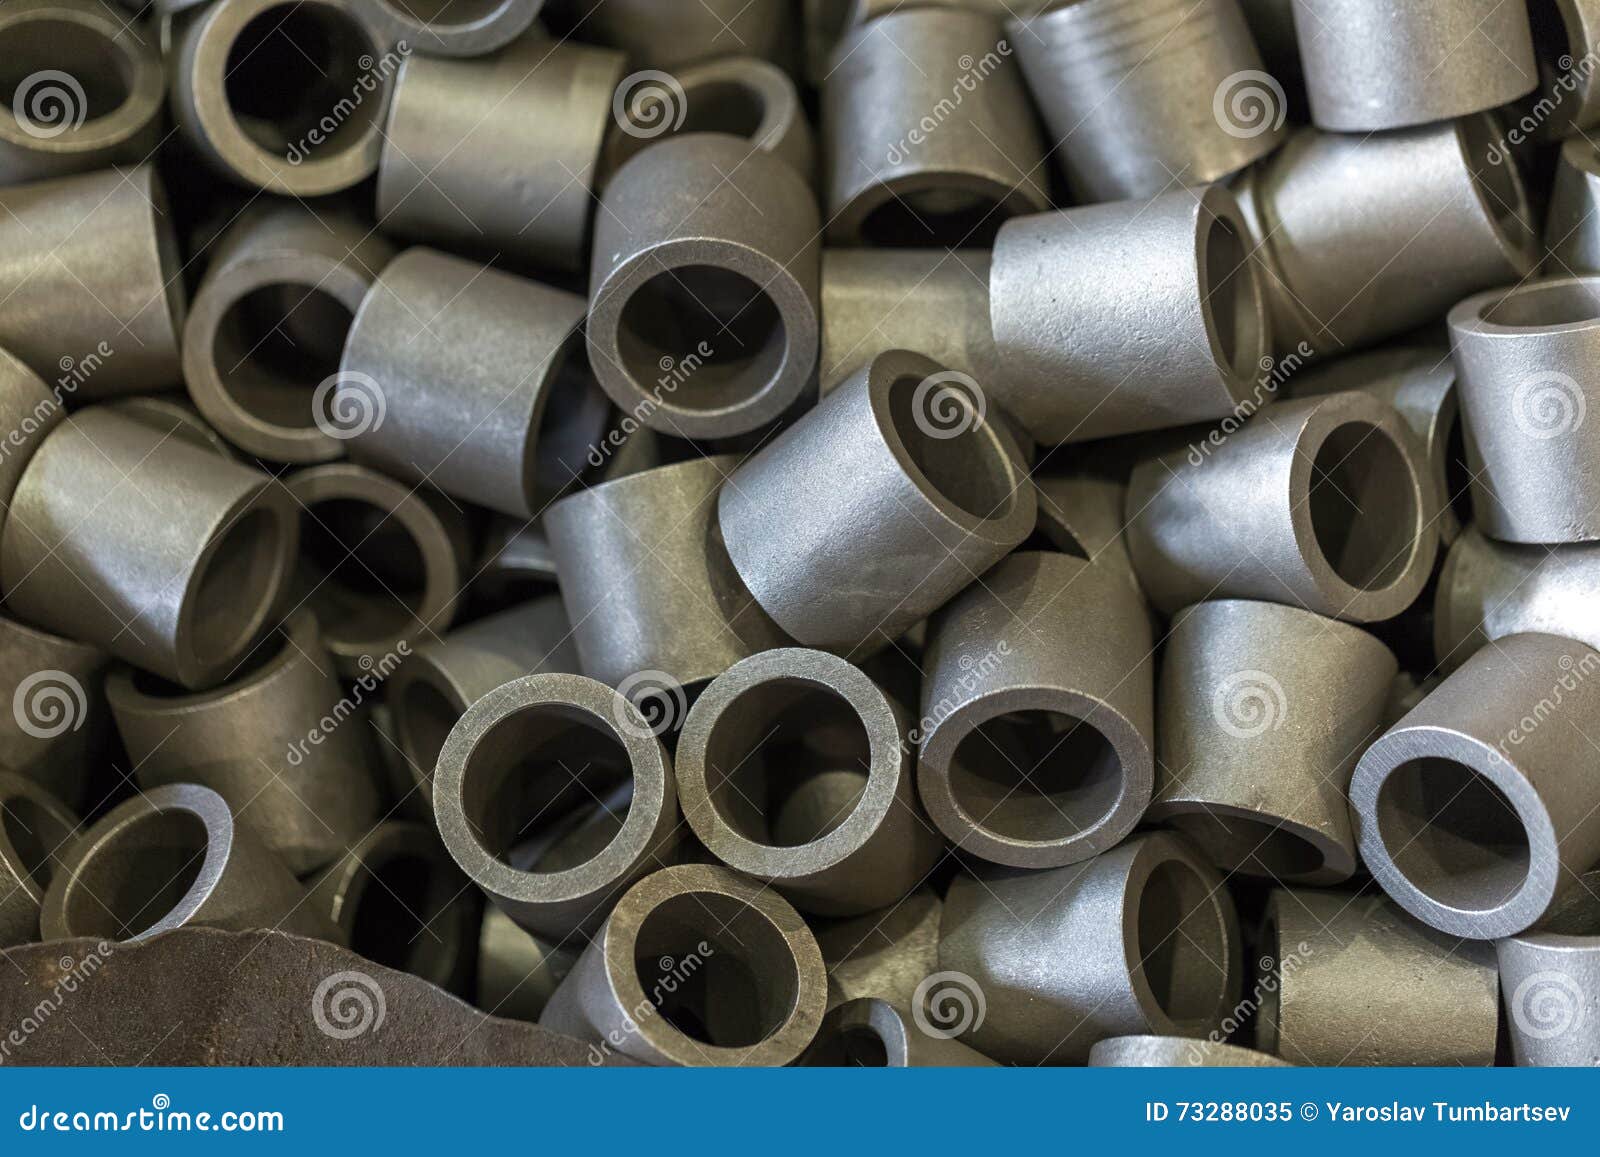 billet steel parts in the shop of engineering plant in large qua